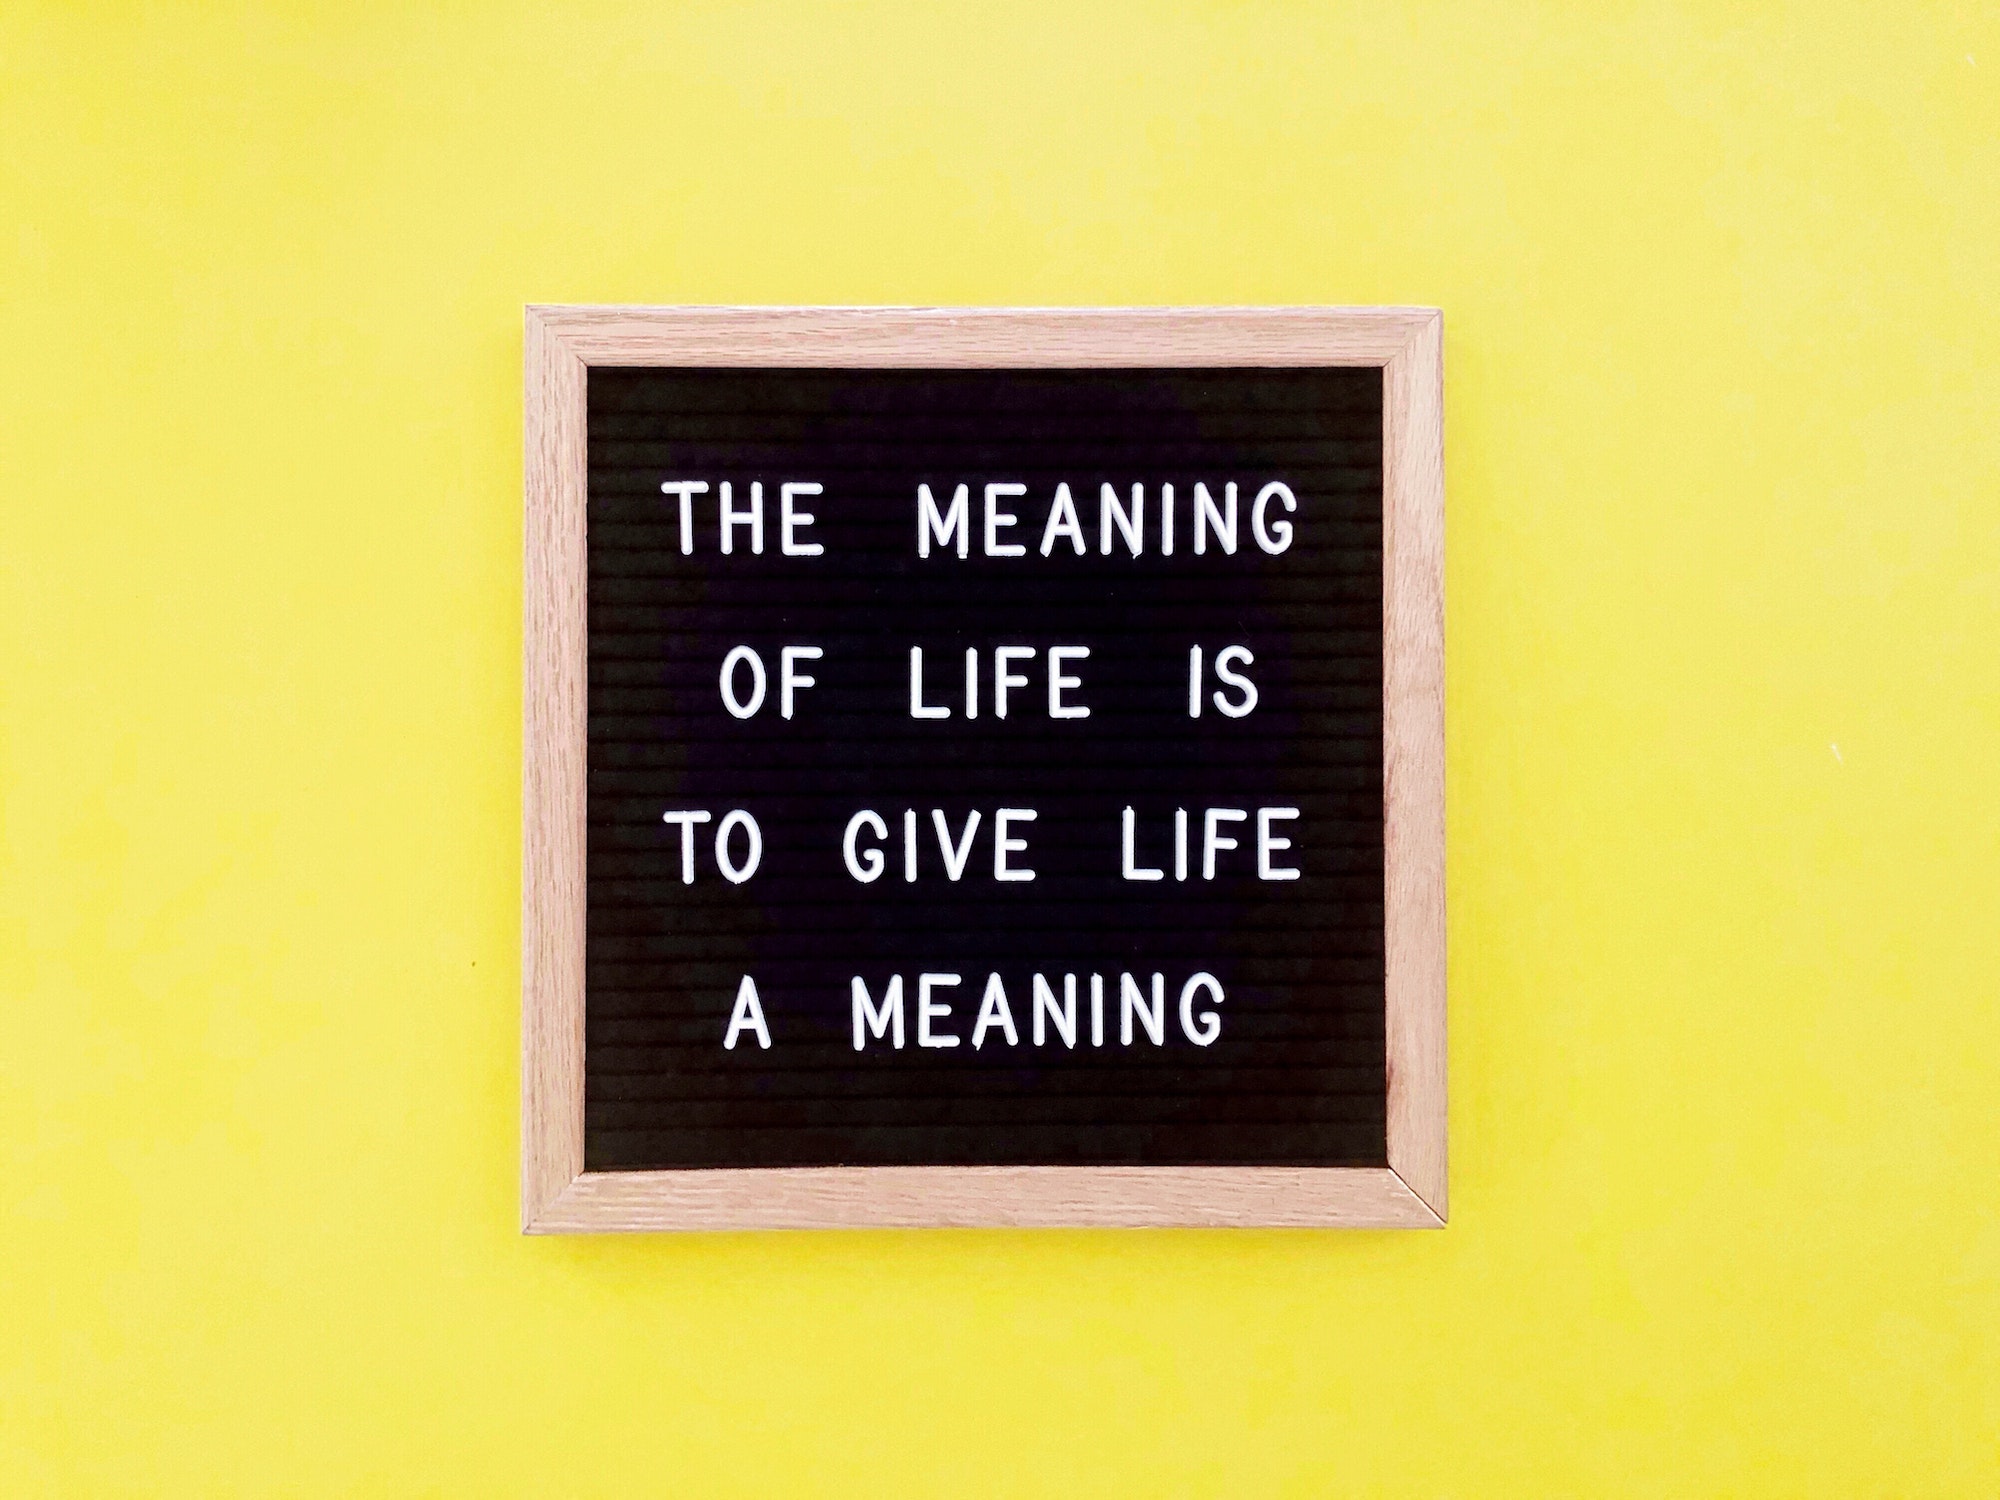 The meaning of life is to give life a meaning